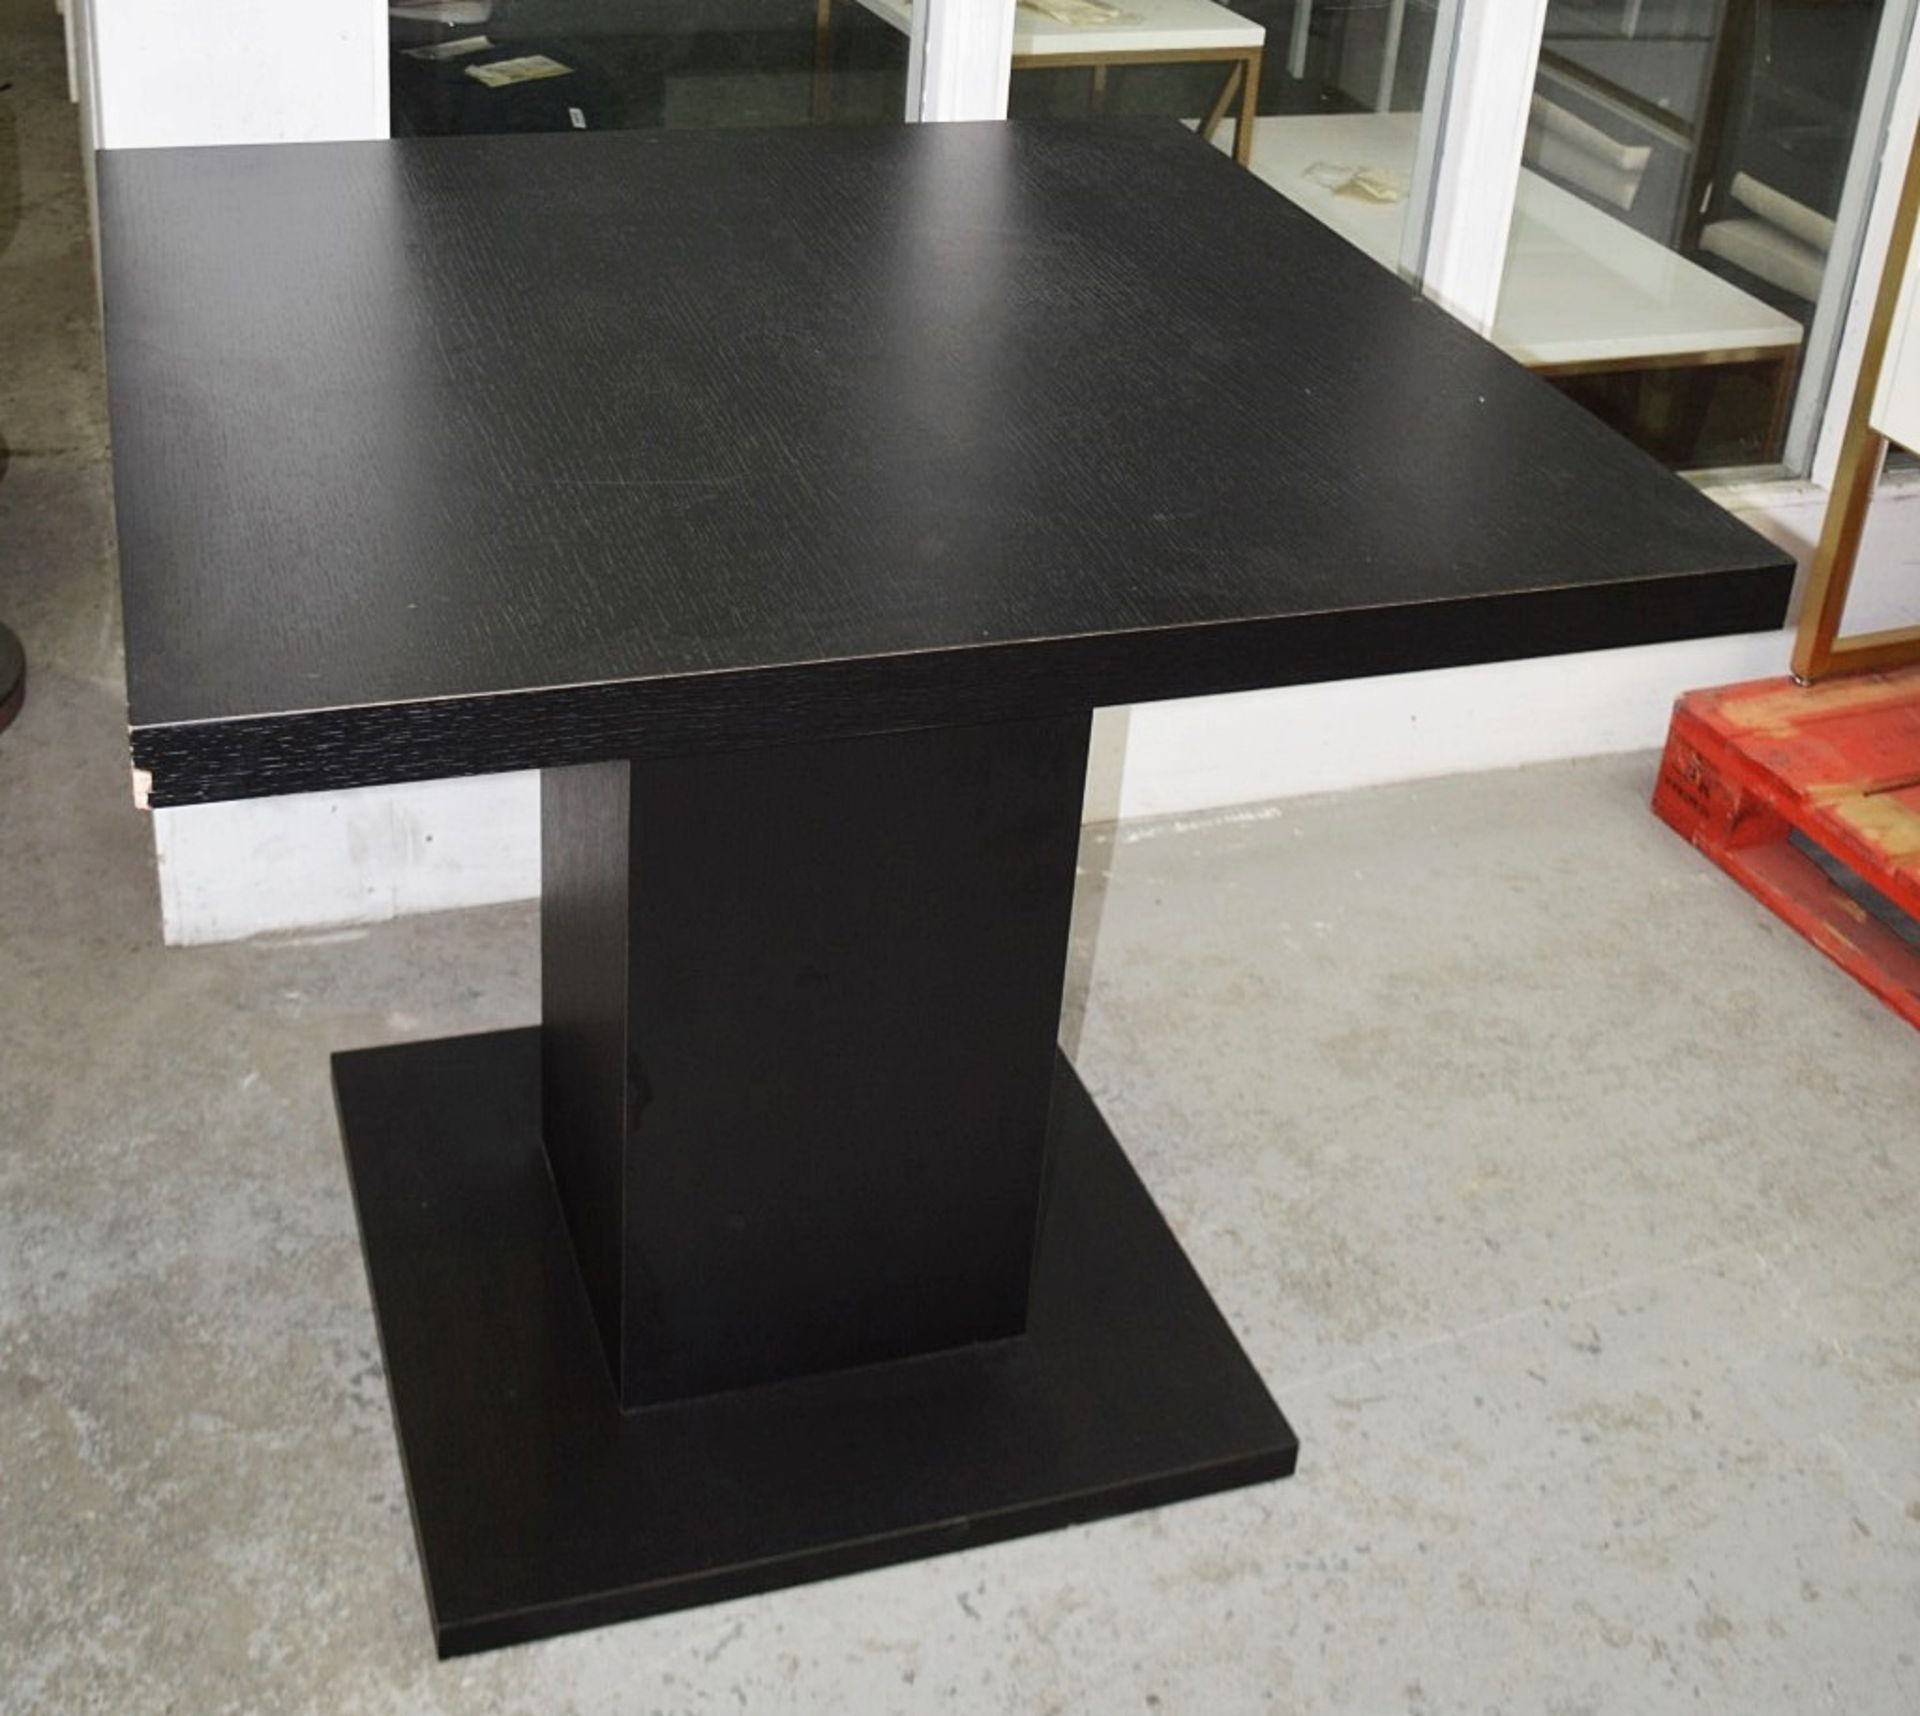 1 x Large Square Dining / Meeting Table In A Dark Wood Veneer With 4 Leather Upholstered Stools - Image 3 of 10